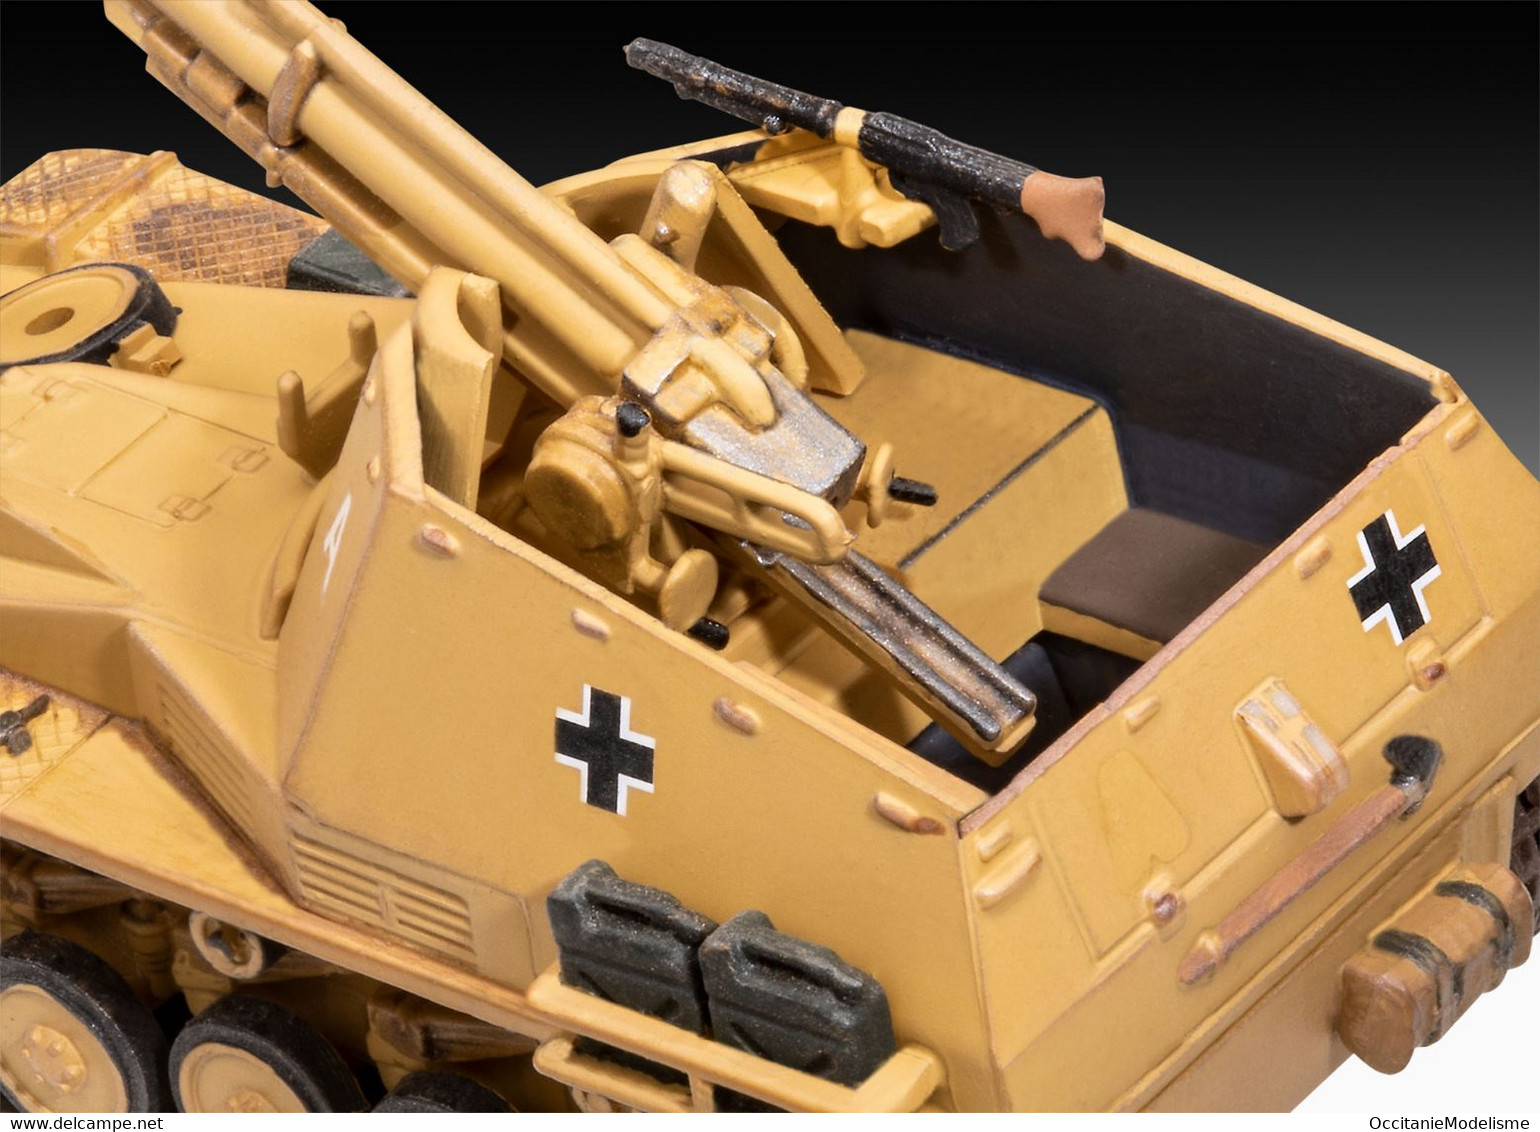 Revell - DIORAMA SET Char Obusier Sd.Kfz. 124 WESPE Maquette Militaire + Peinture + Colle Réf. 03334 Neuf NBO 1/76 - Véhicules Militaires